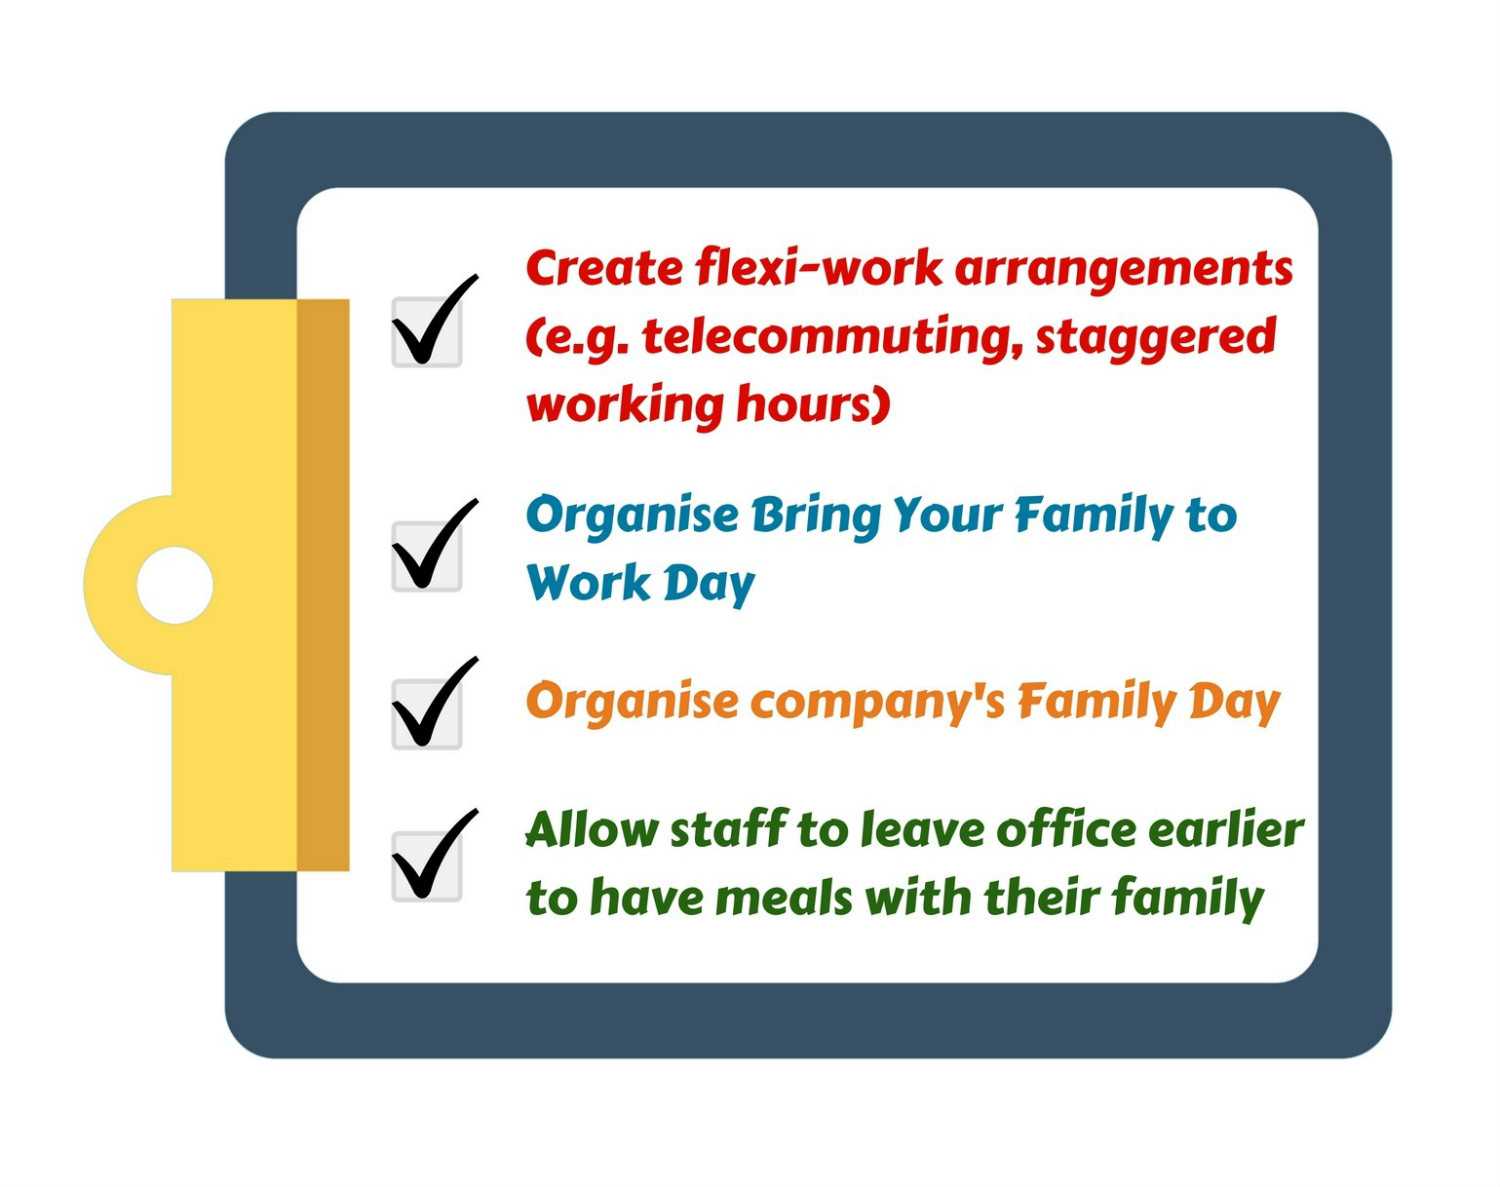 Familiy-friendly options for employer support